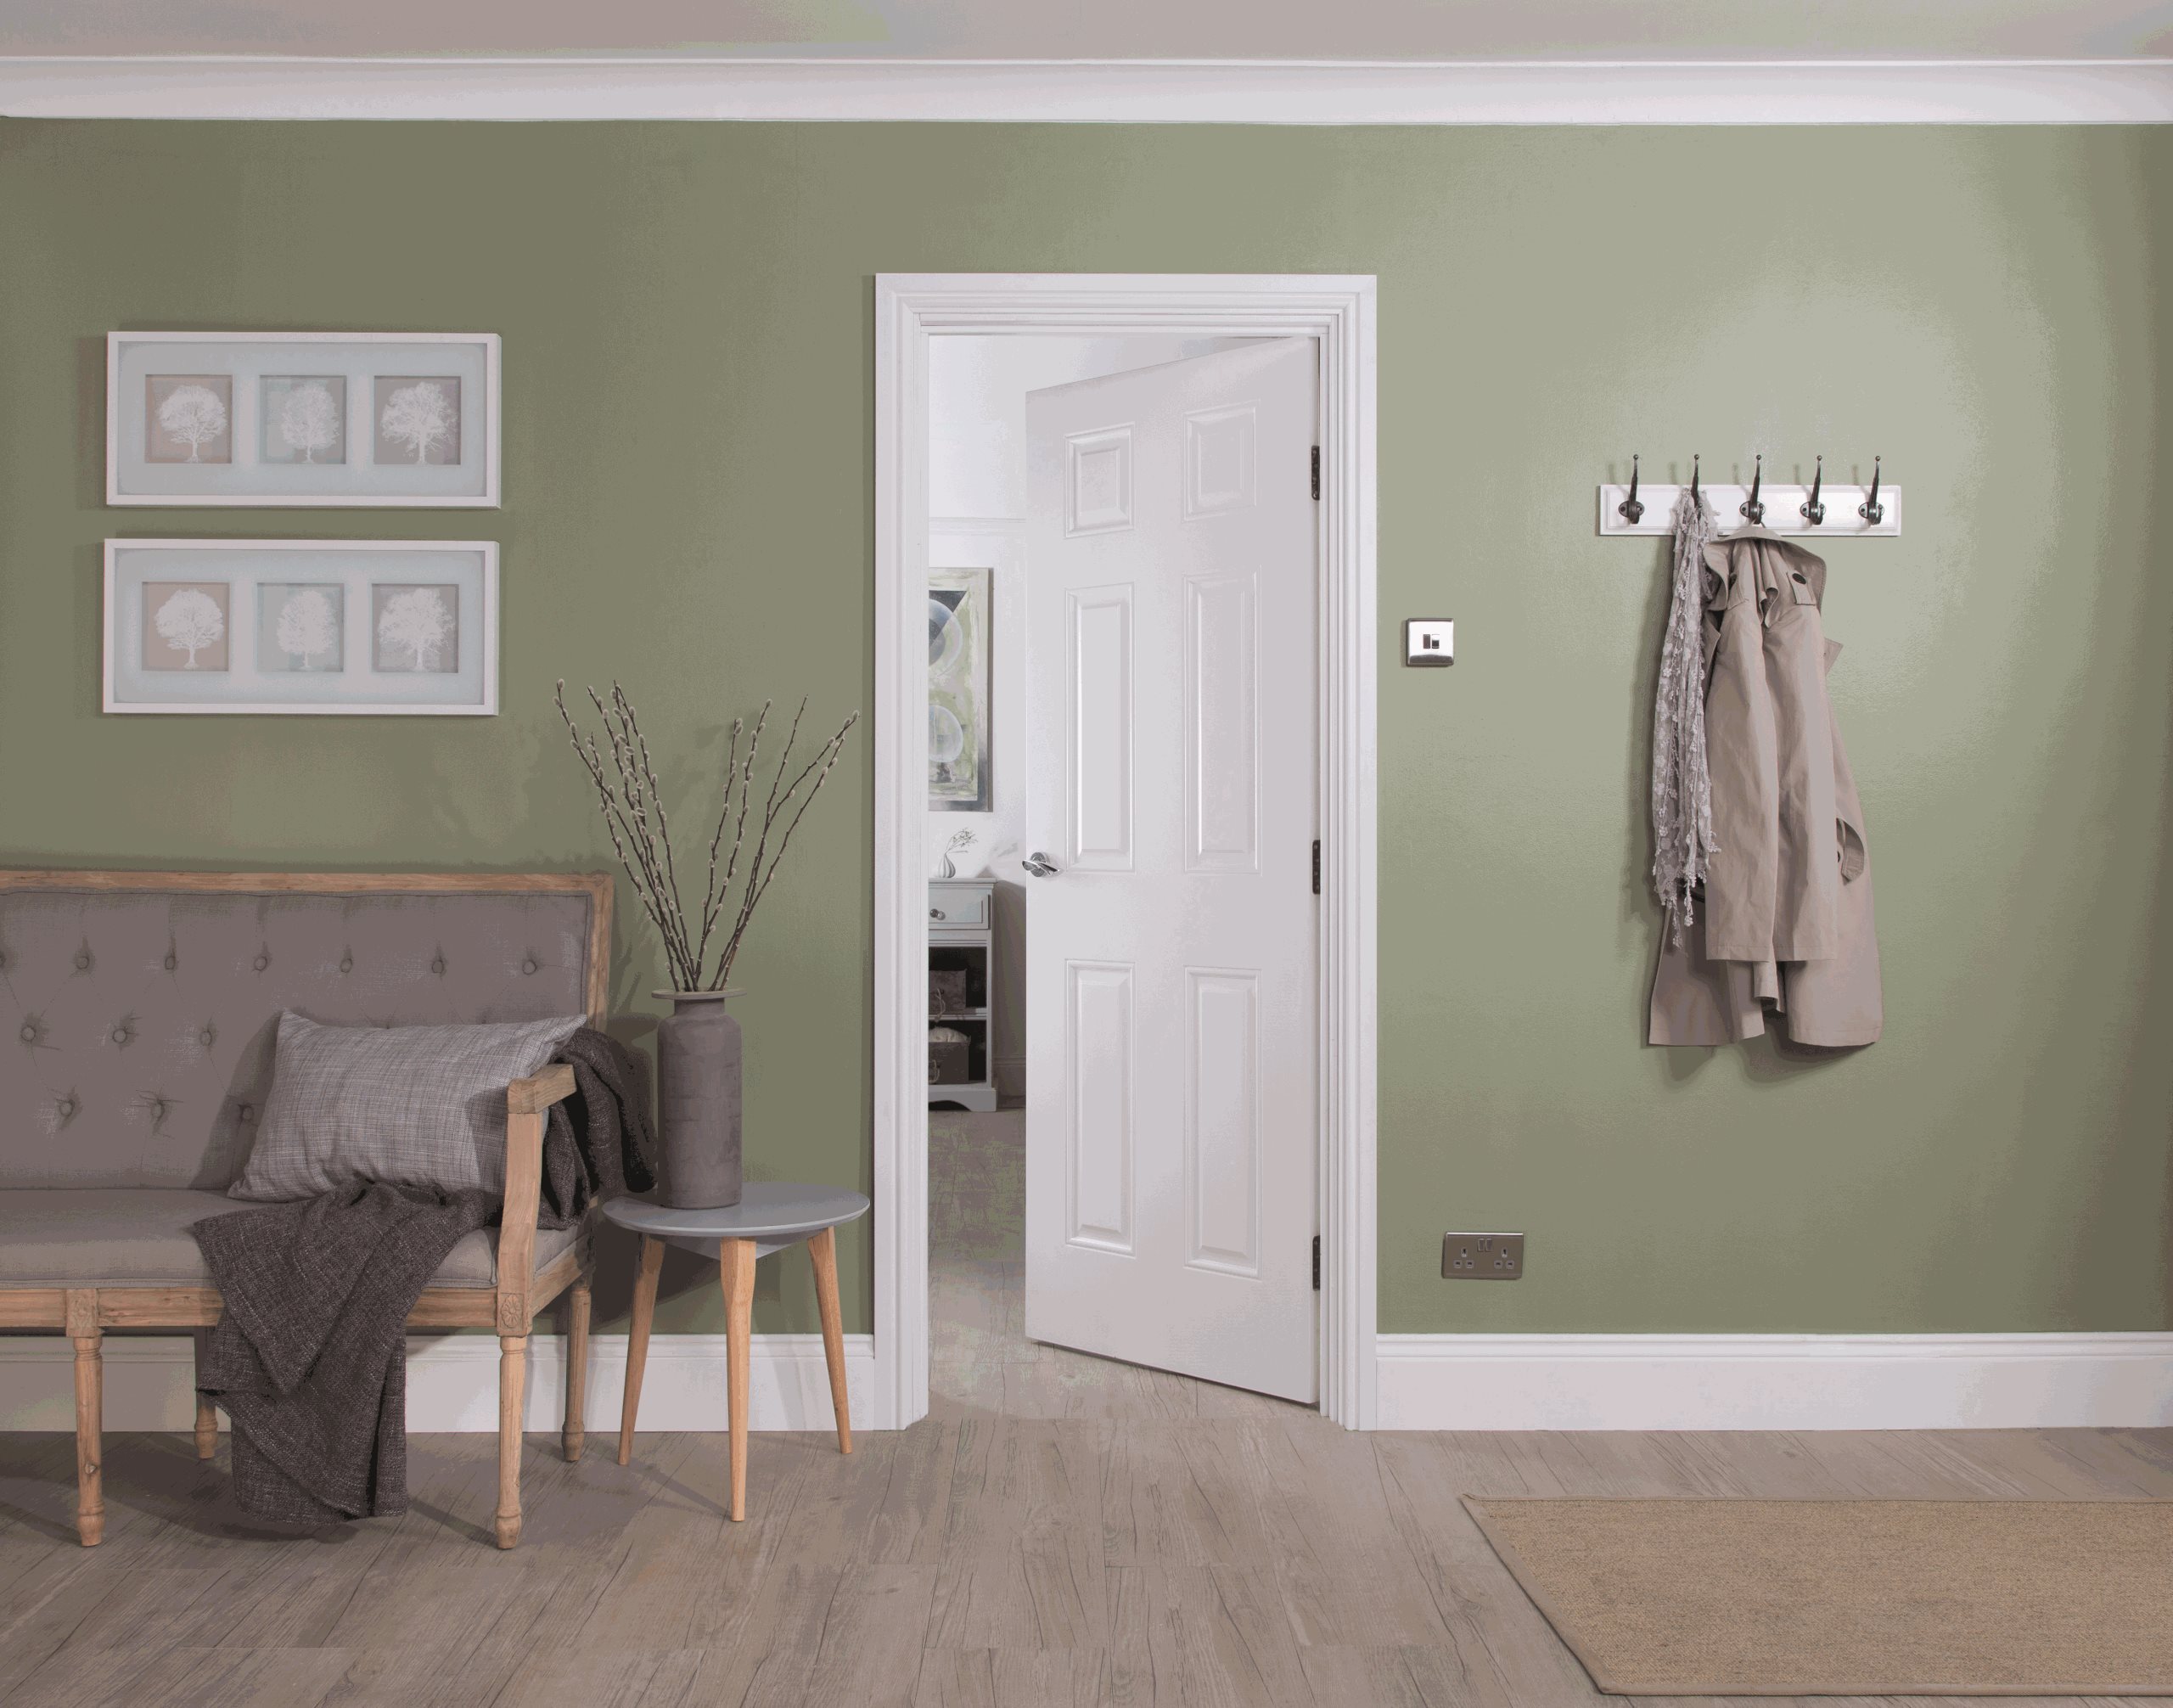 Fire doors - designed to fit 